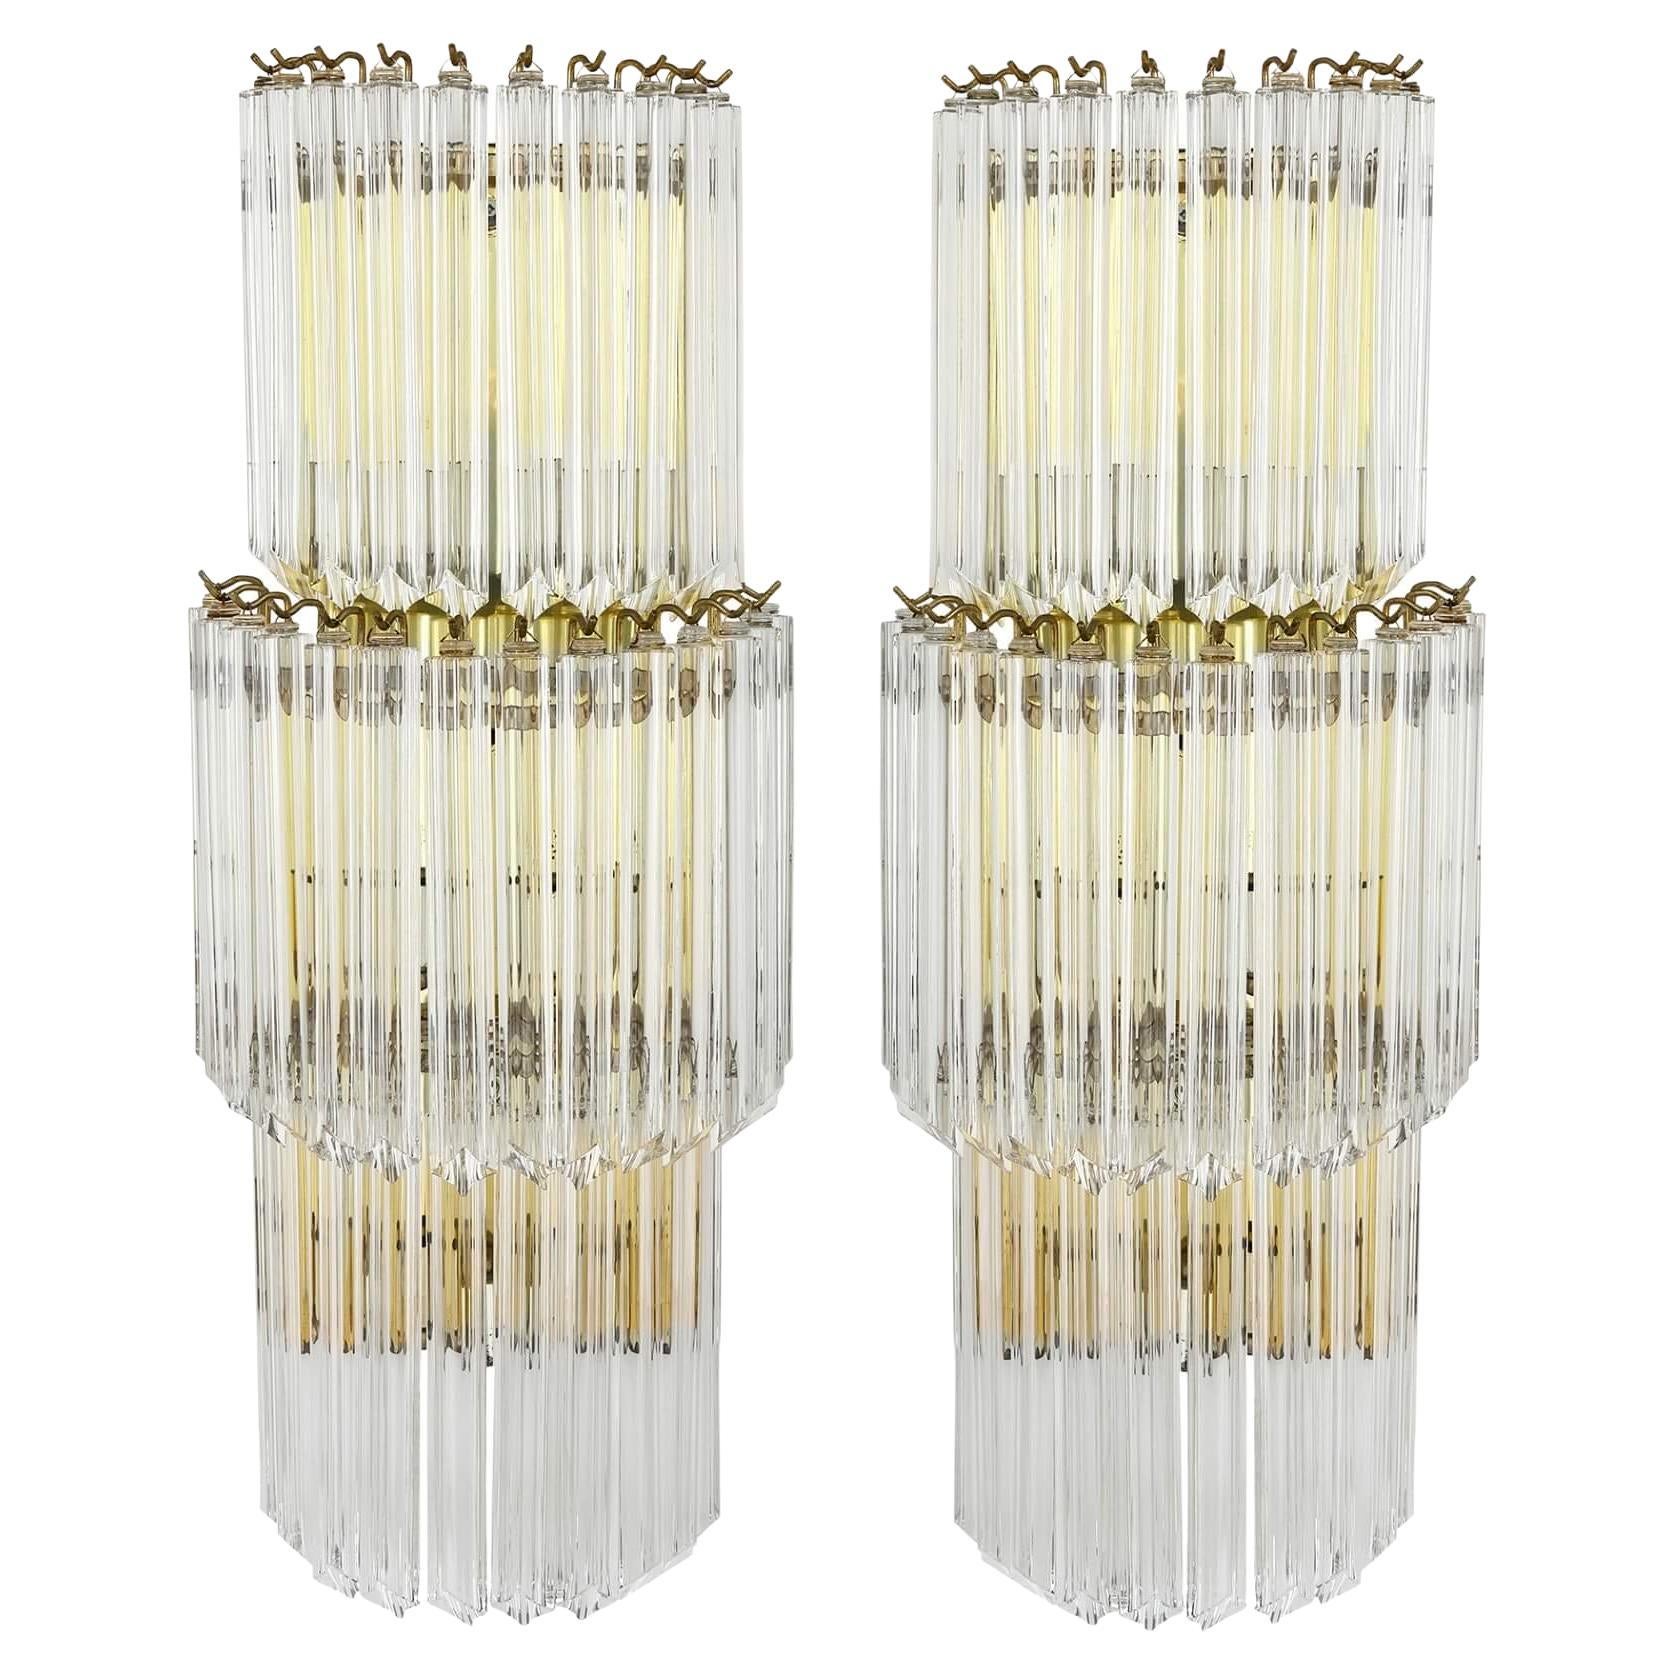 Pair of Midcentury Murano Glass Wall Lights by Camer